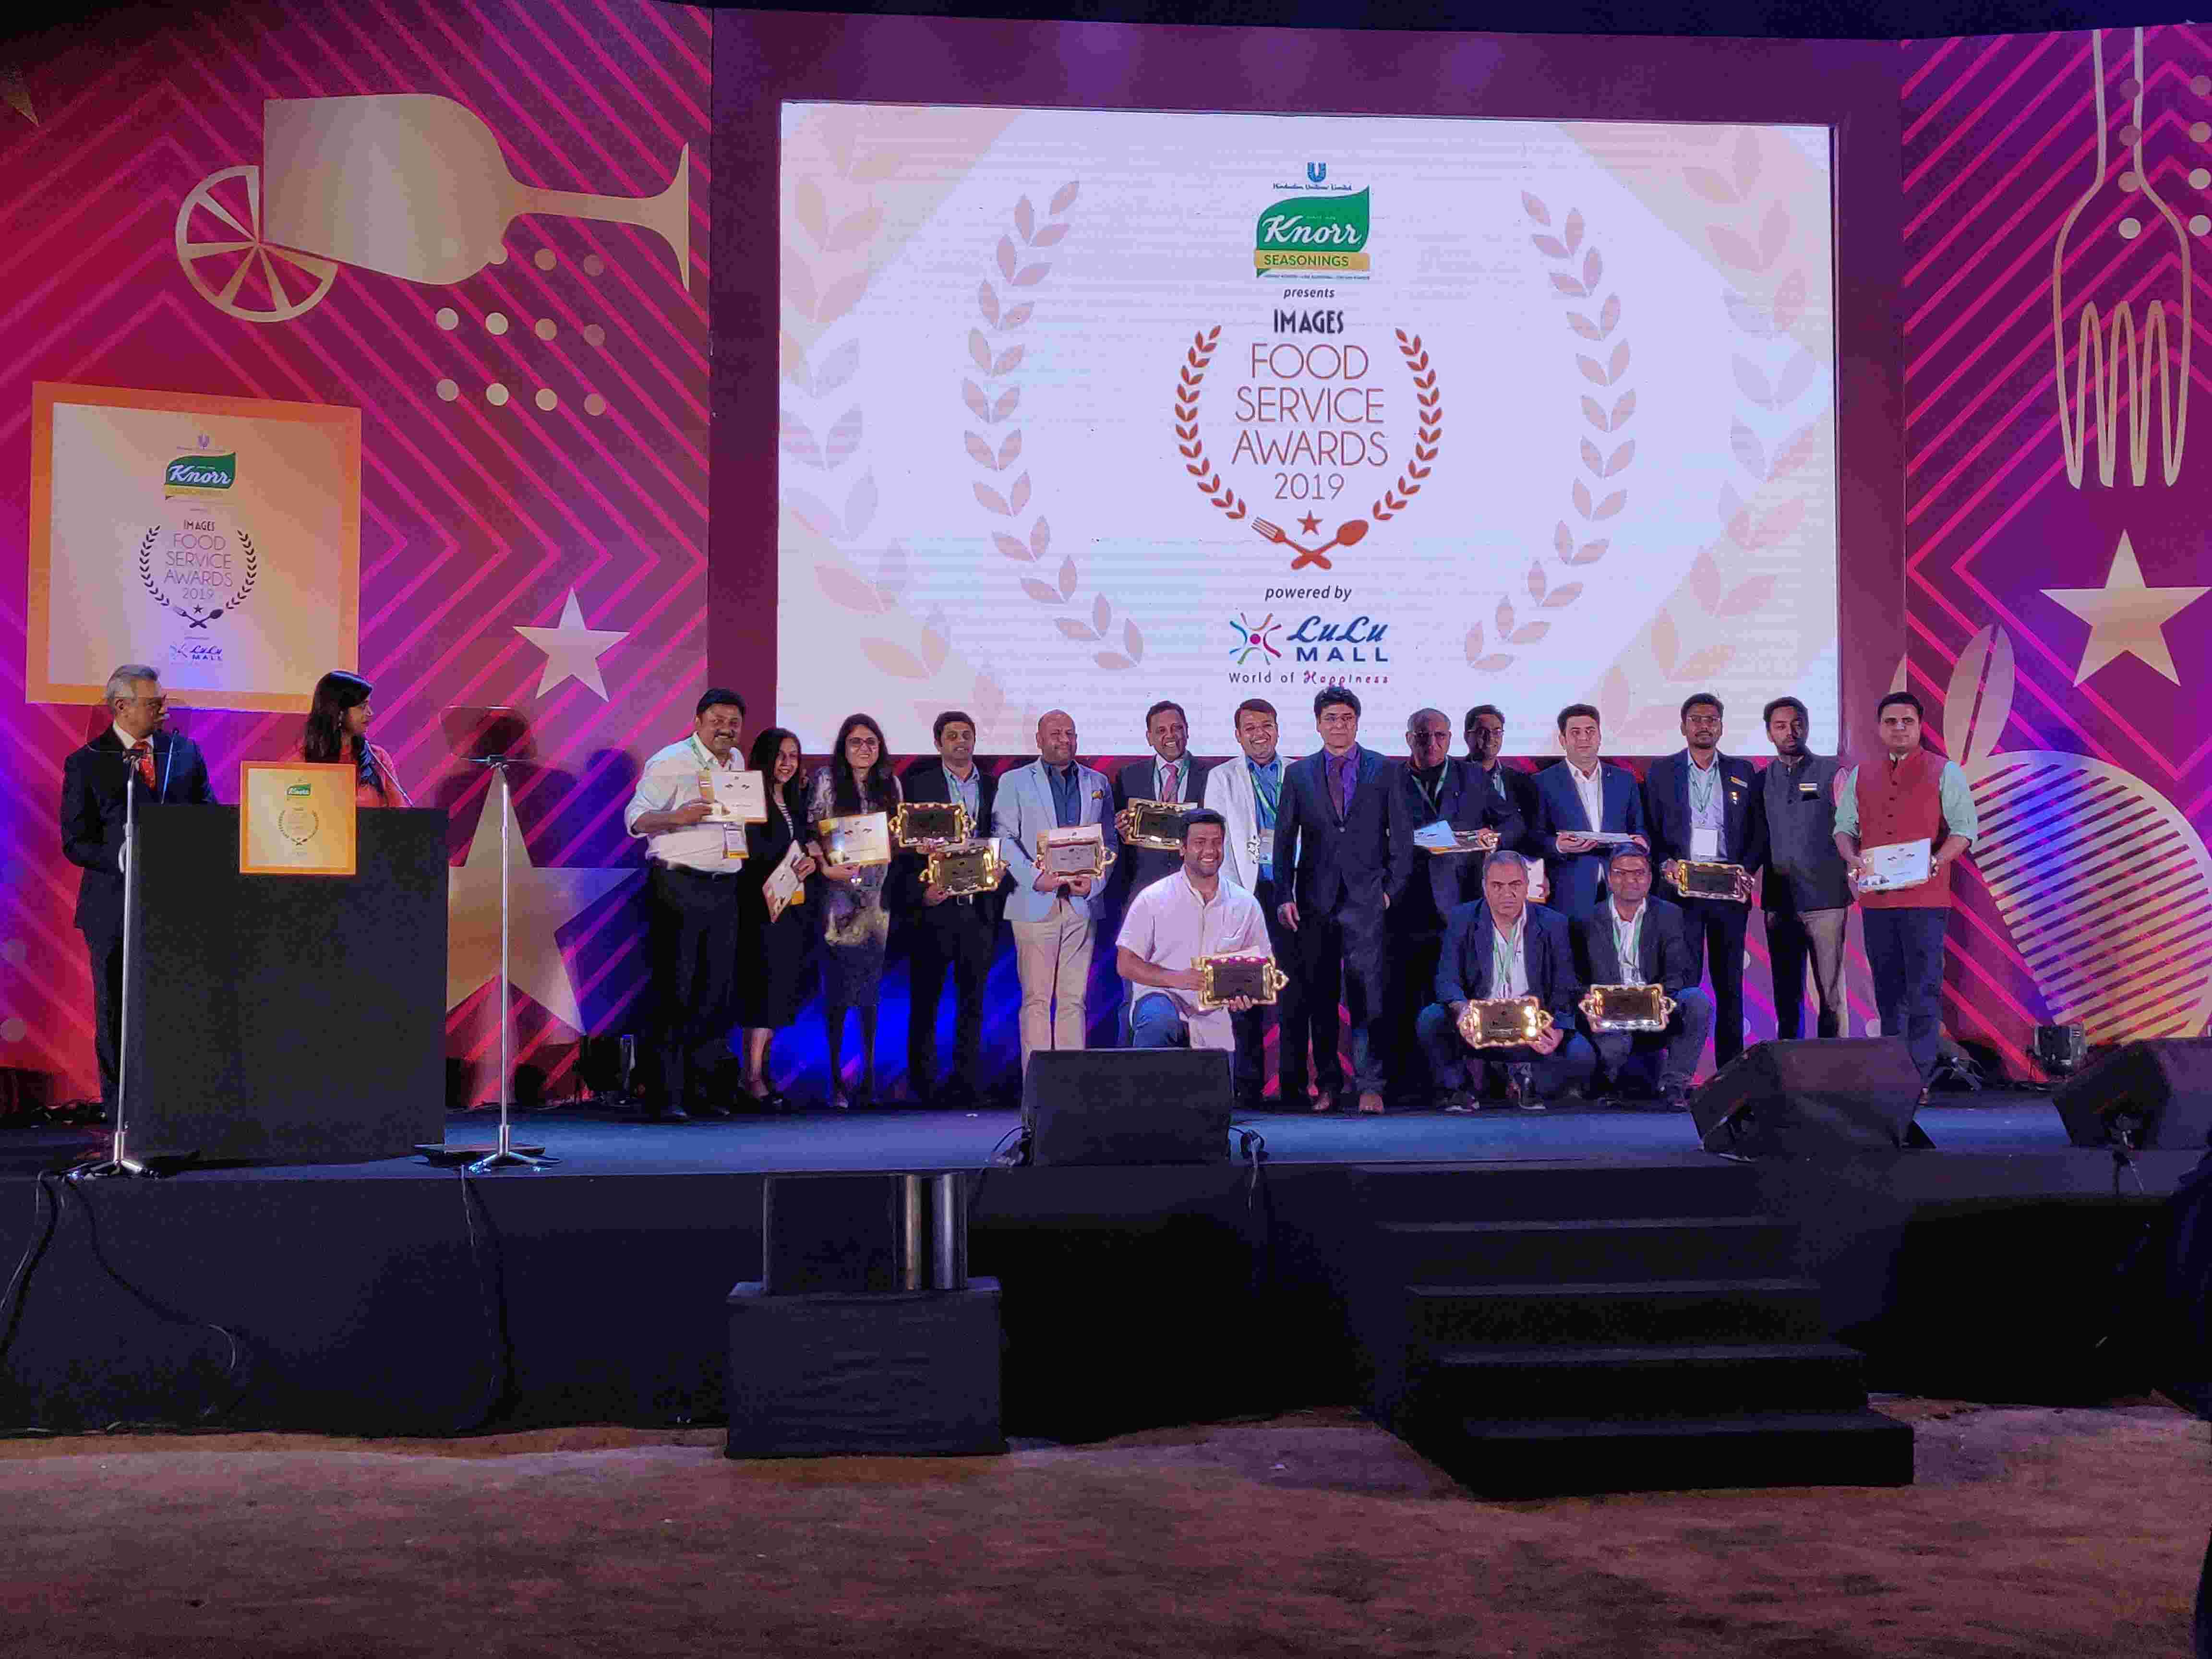 IMAGES Group honours Indian foodservice giants - Indiaretailing.com